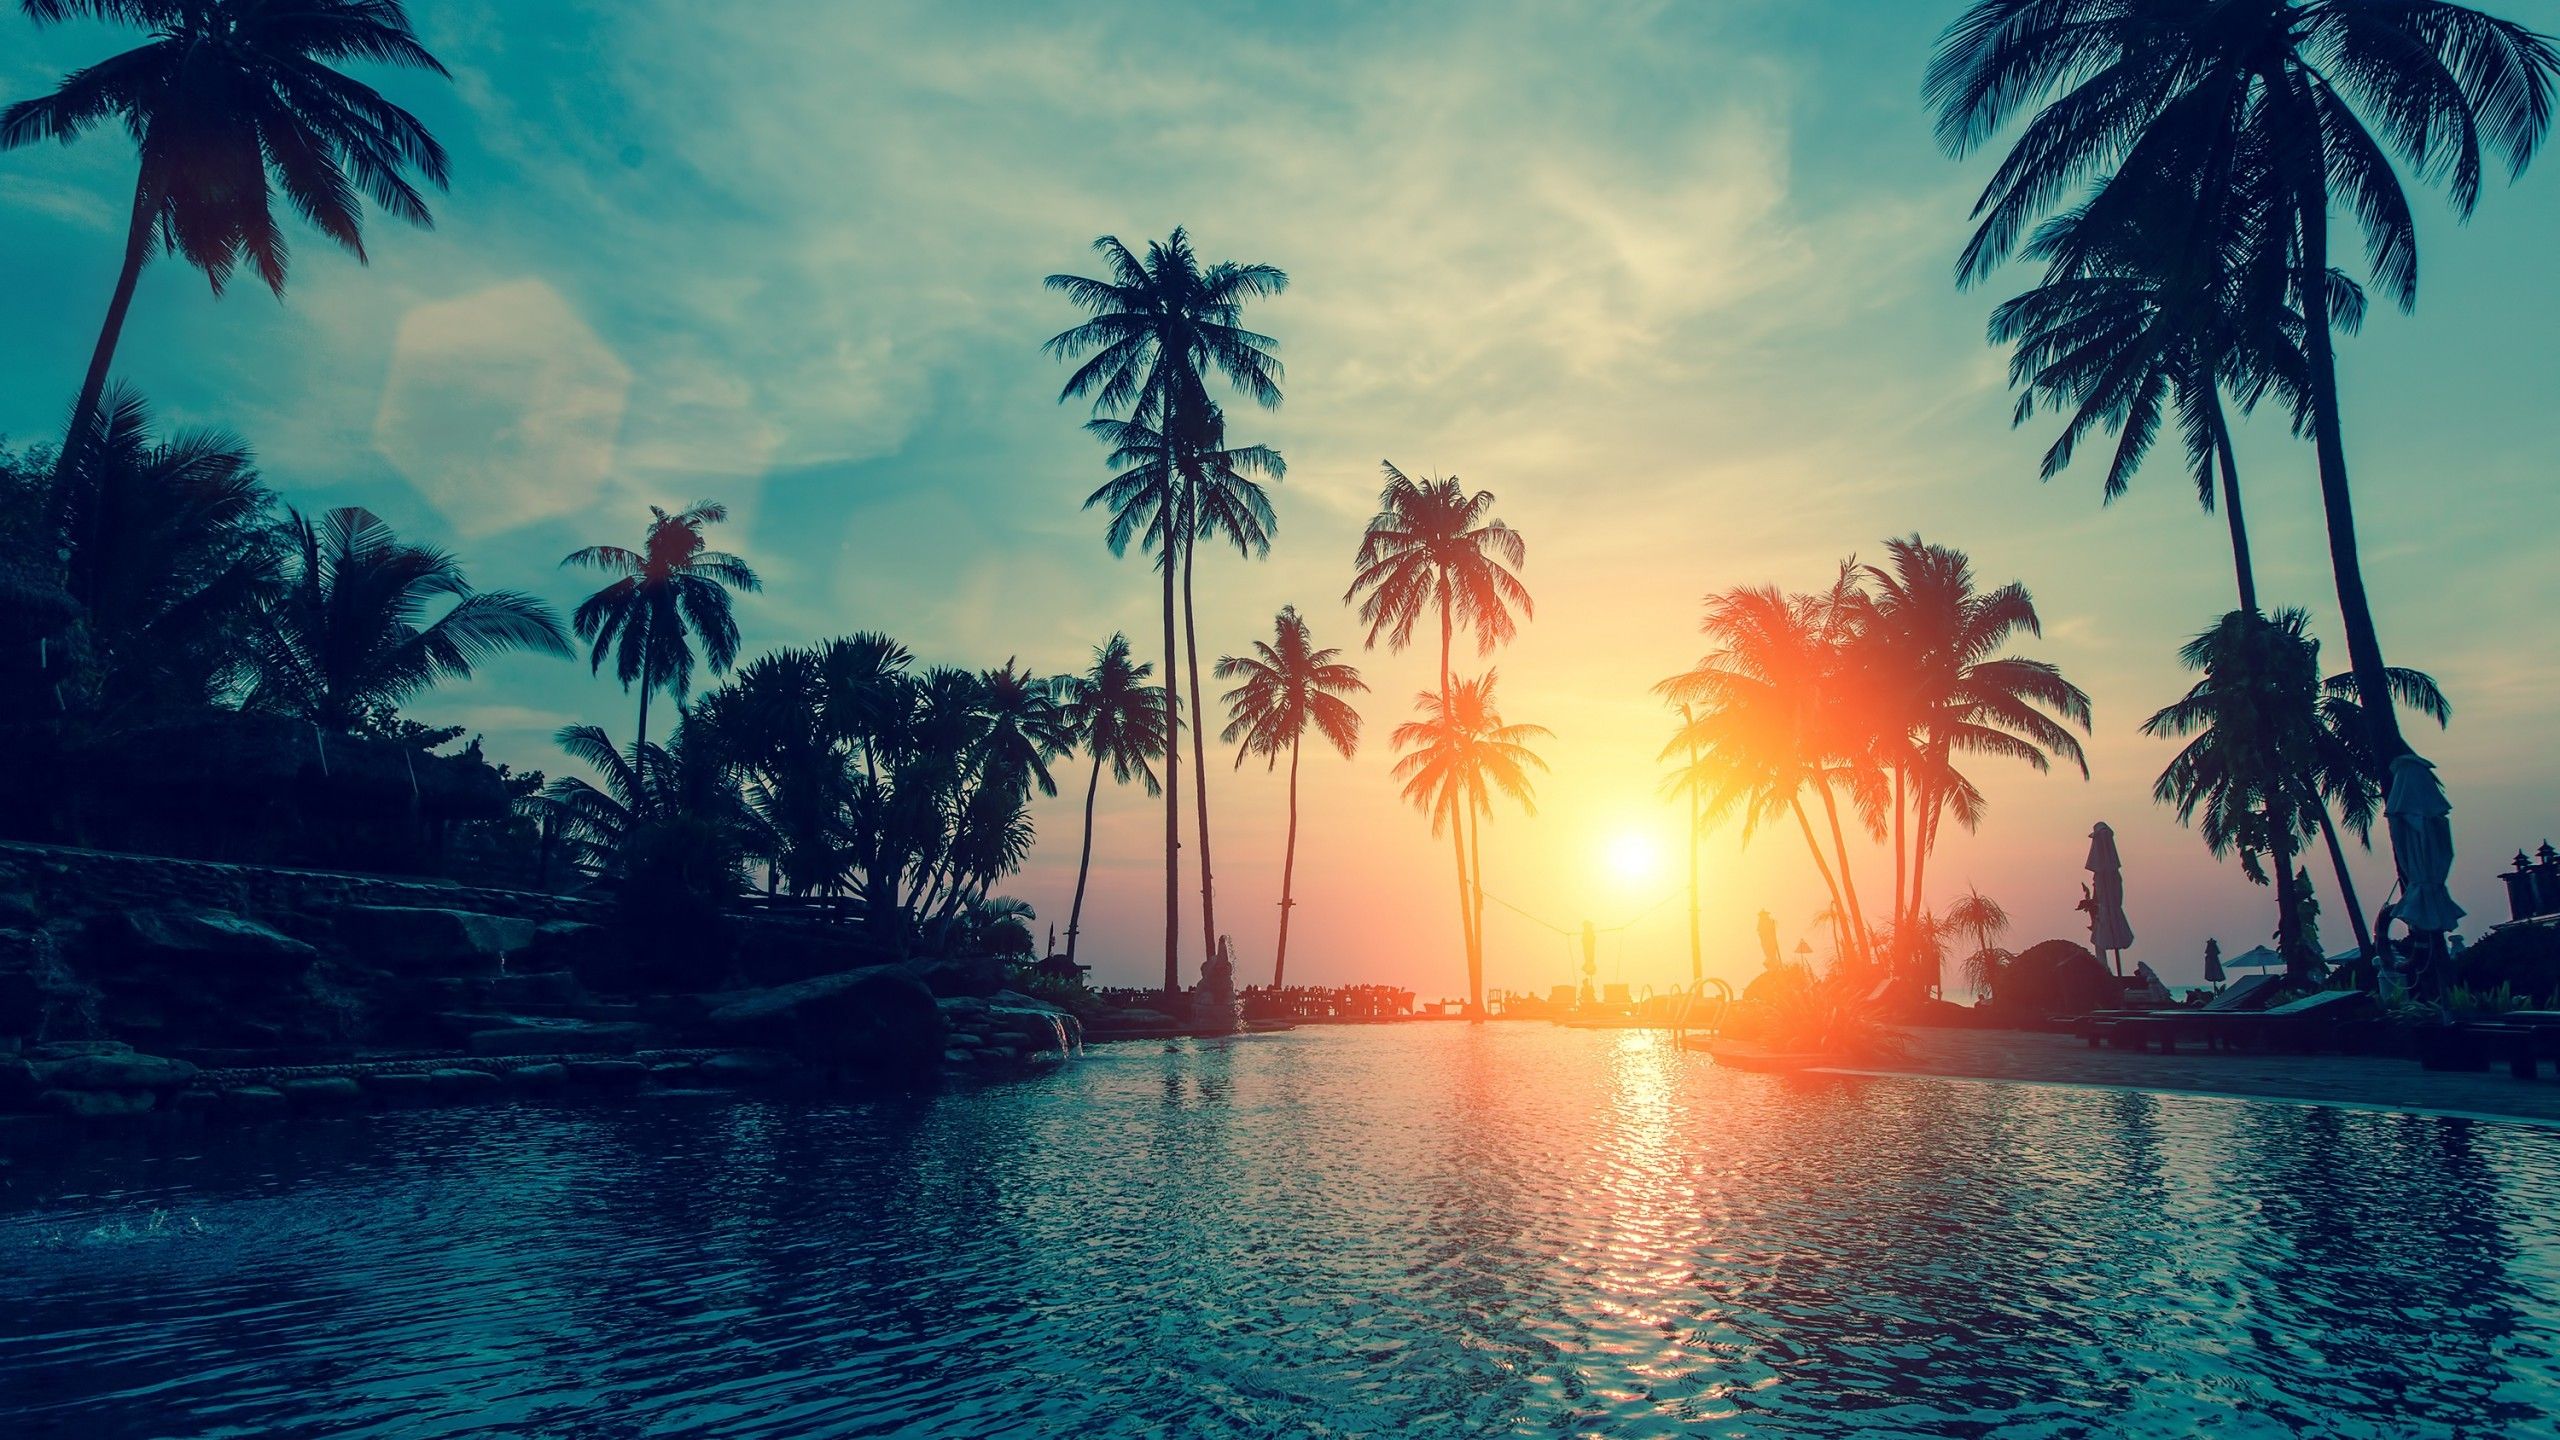 A sunset over the ocean with palm trees - Palm tree